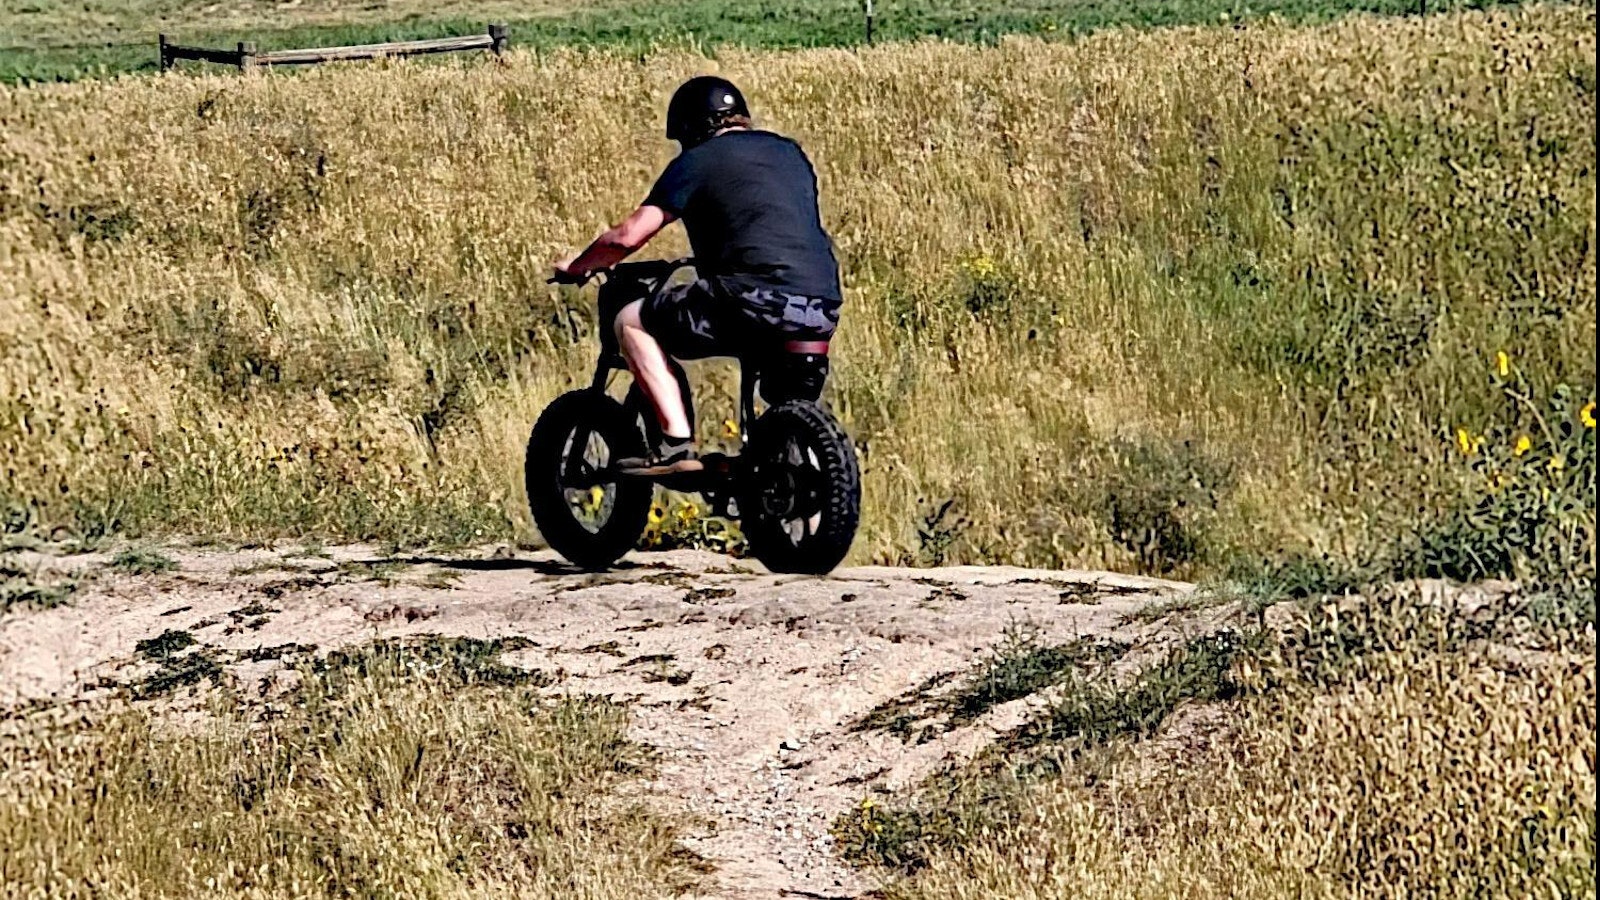 Aaron Turpen put the new Indian Hooligan e-bike through its paces.